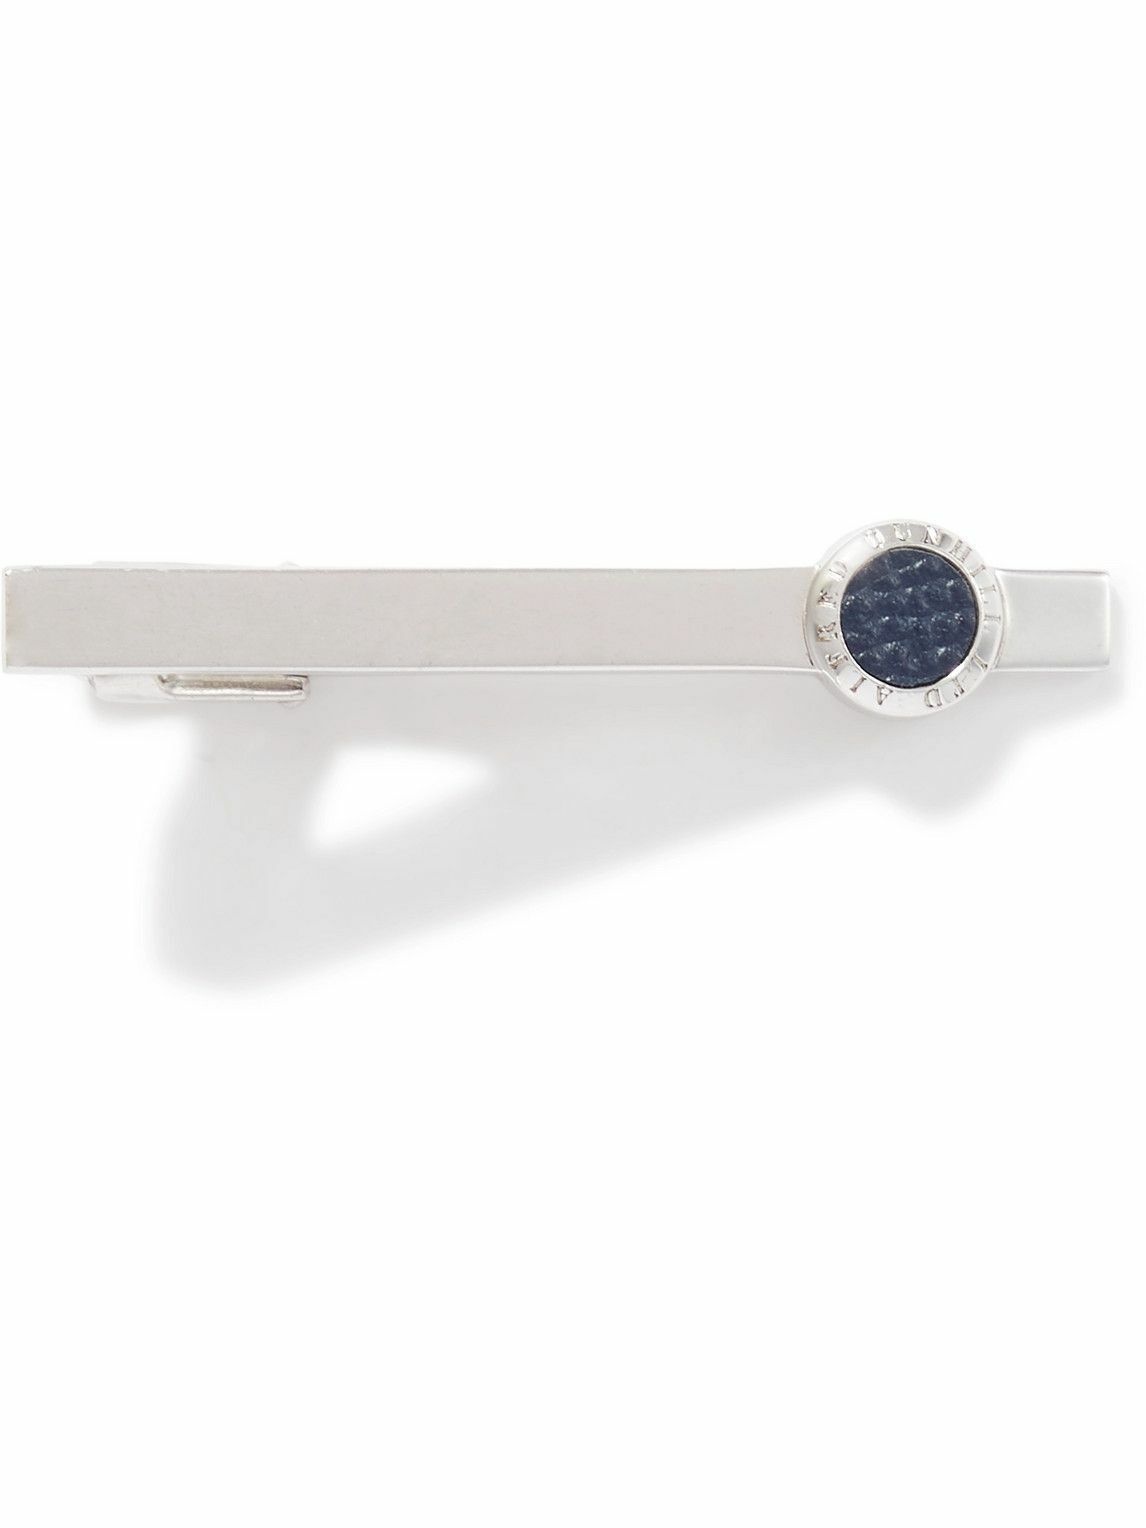 Photo: Dunhill - Rhodium-Plated Silver and Leather Tie Clip